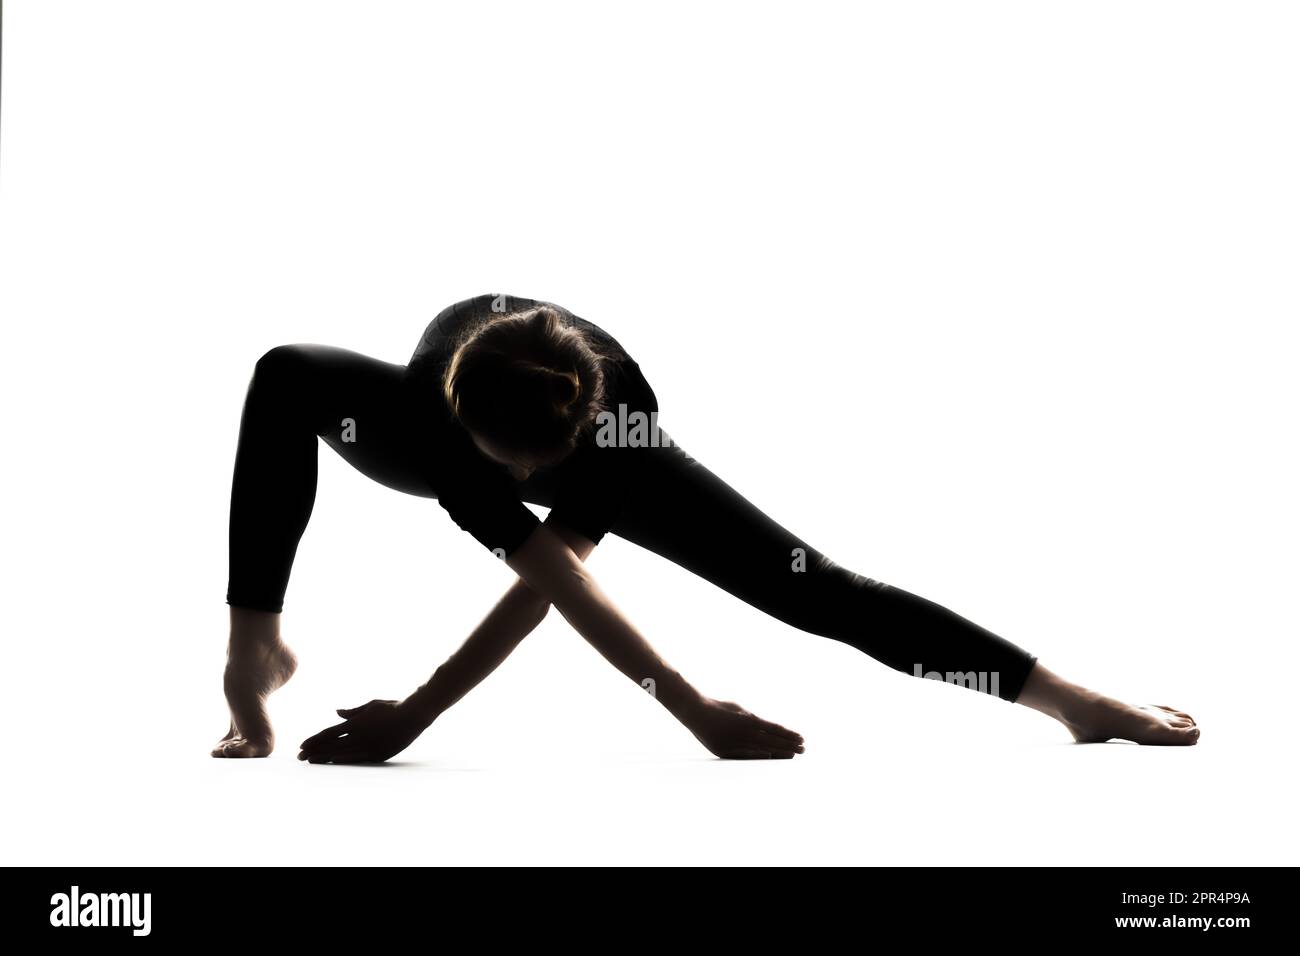 A woman in a yoga asana pose with her arms extended on a white background Stock Photo